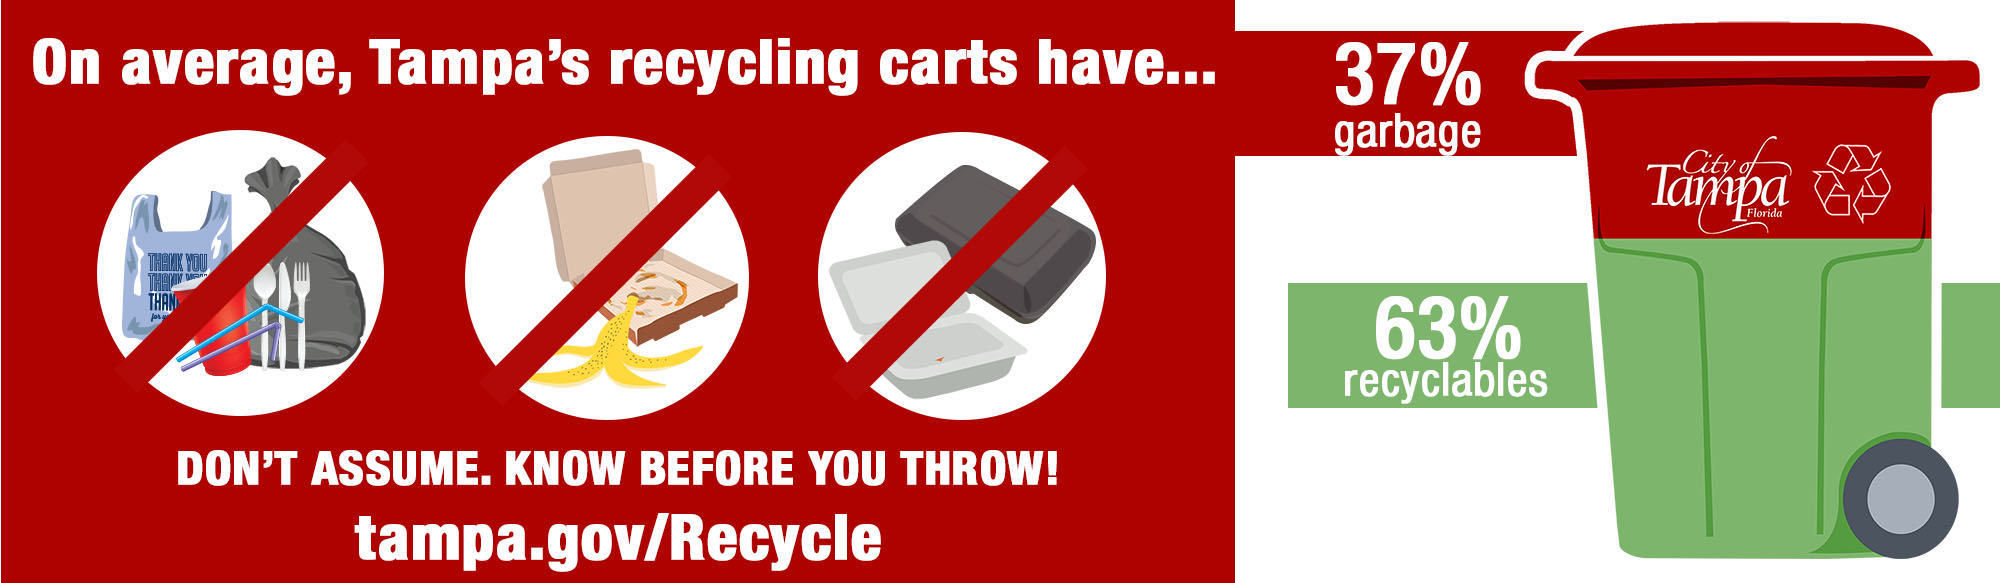 Graphic showing that 37% of what people place in their recycling cart is prohibited trash items